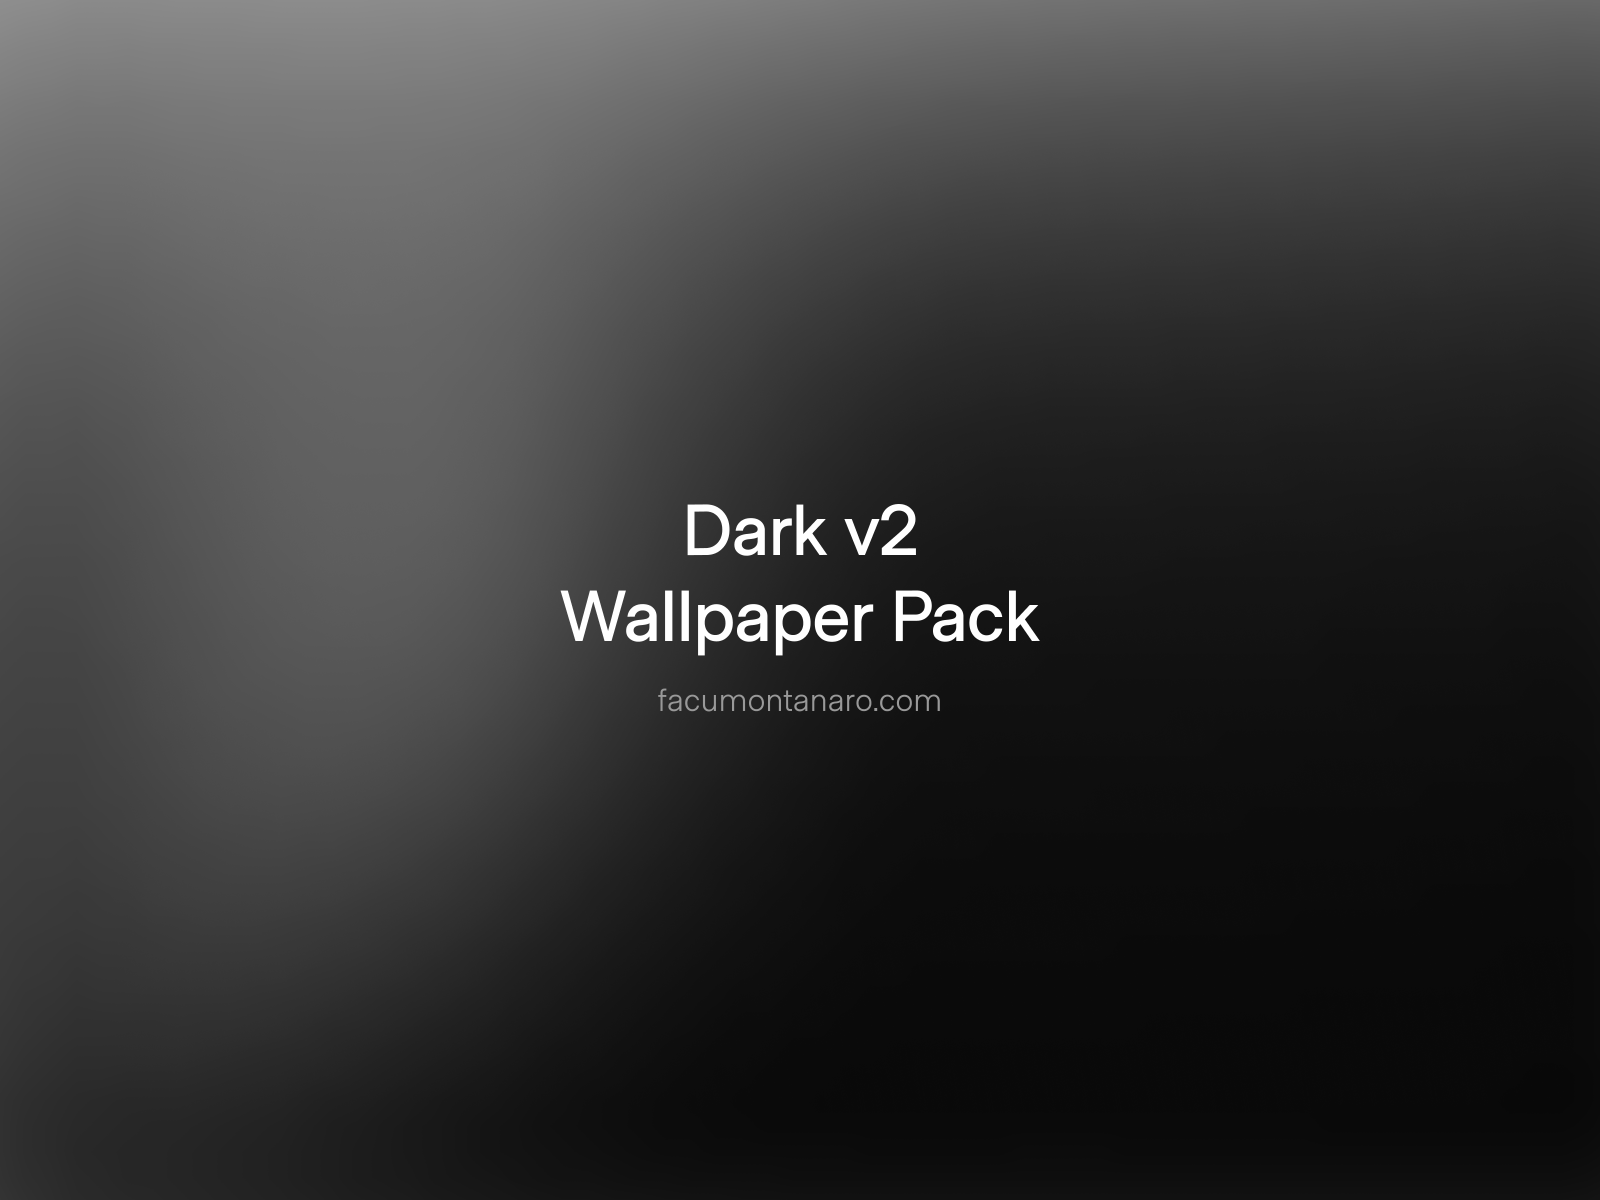 Dark v2 - Wallpapers Pack by Facu Montanaro on Dribbble